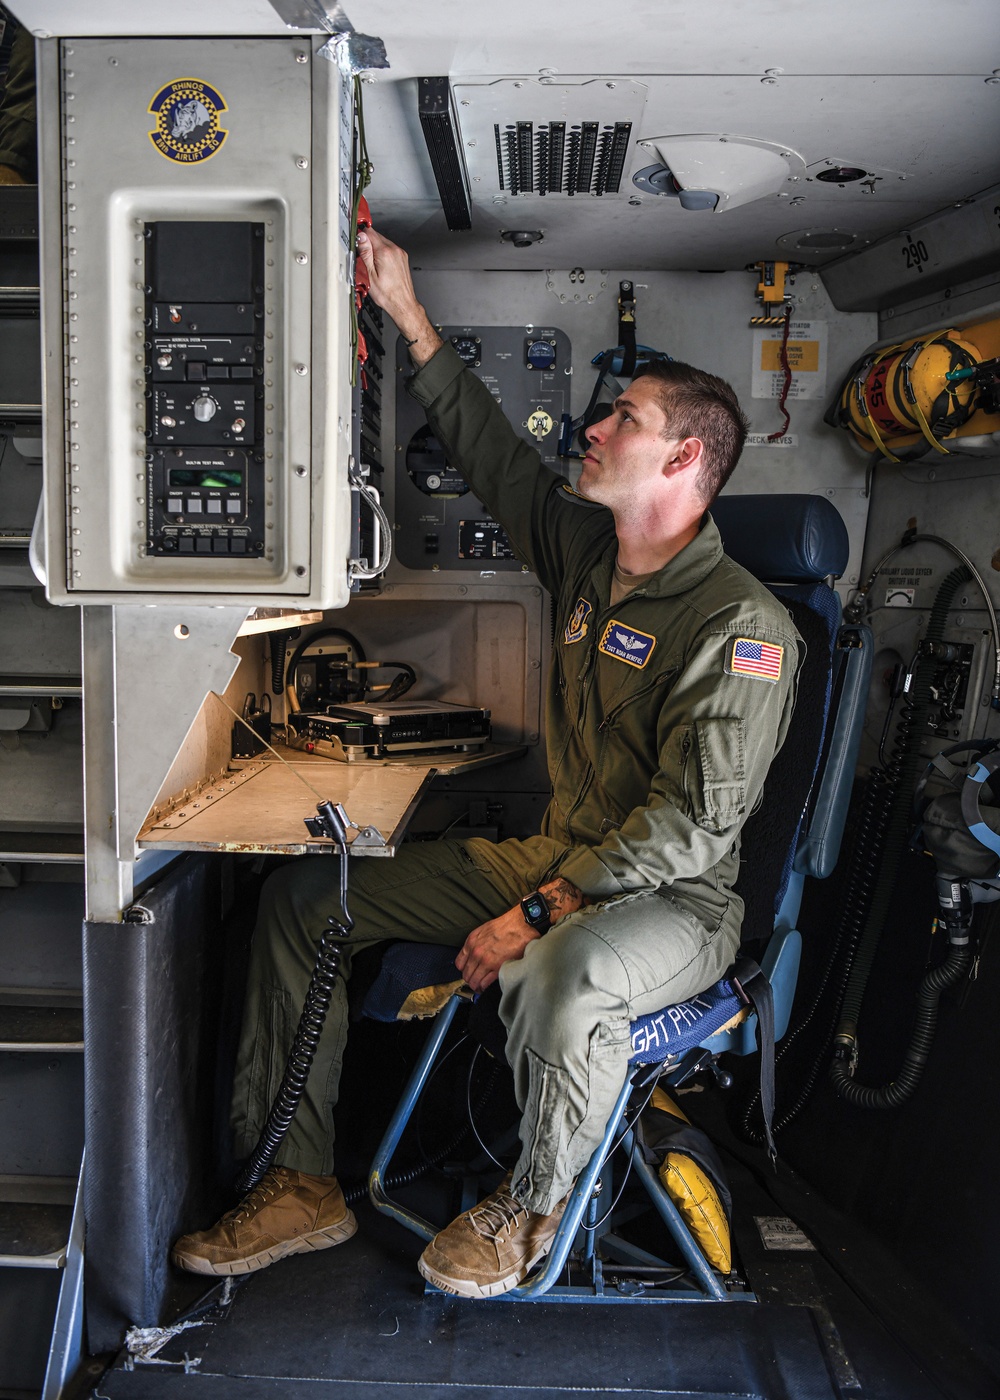 89 AS loadmaster on path to become C-17 pilot